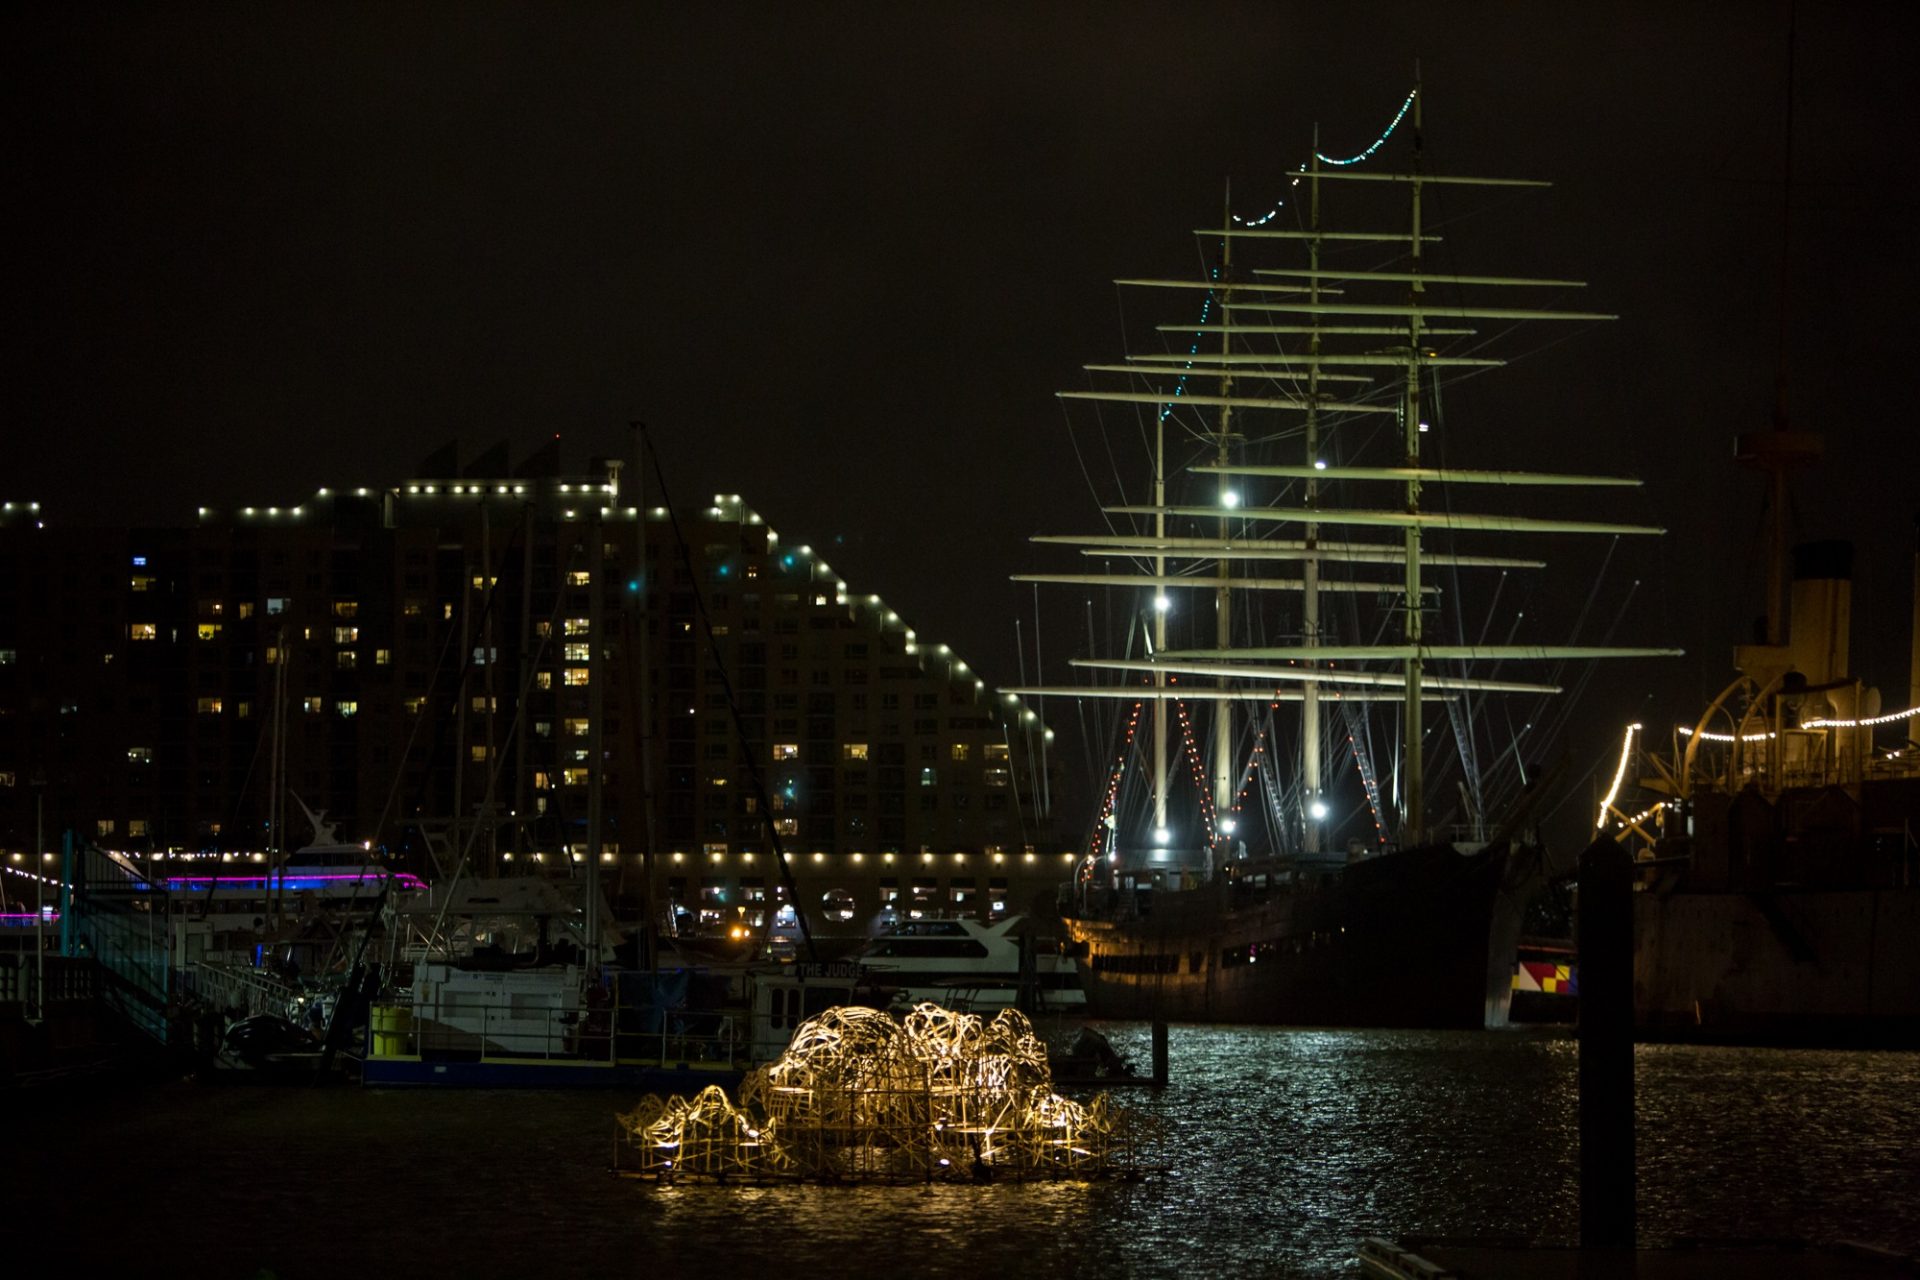 Stephen Talasnik's Endurance sits illuminated in the Delaware River boat basin ready for the opening of the FLOW exhibition. FLOW is a sculpture exhibit on the Delaware River in partnership with Philadelphia Sculptors and the Independence Seaport Museum.